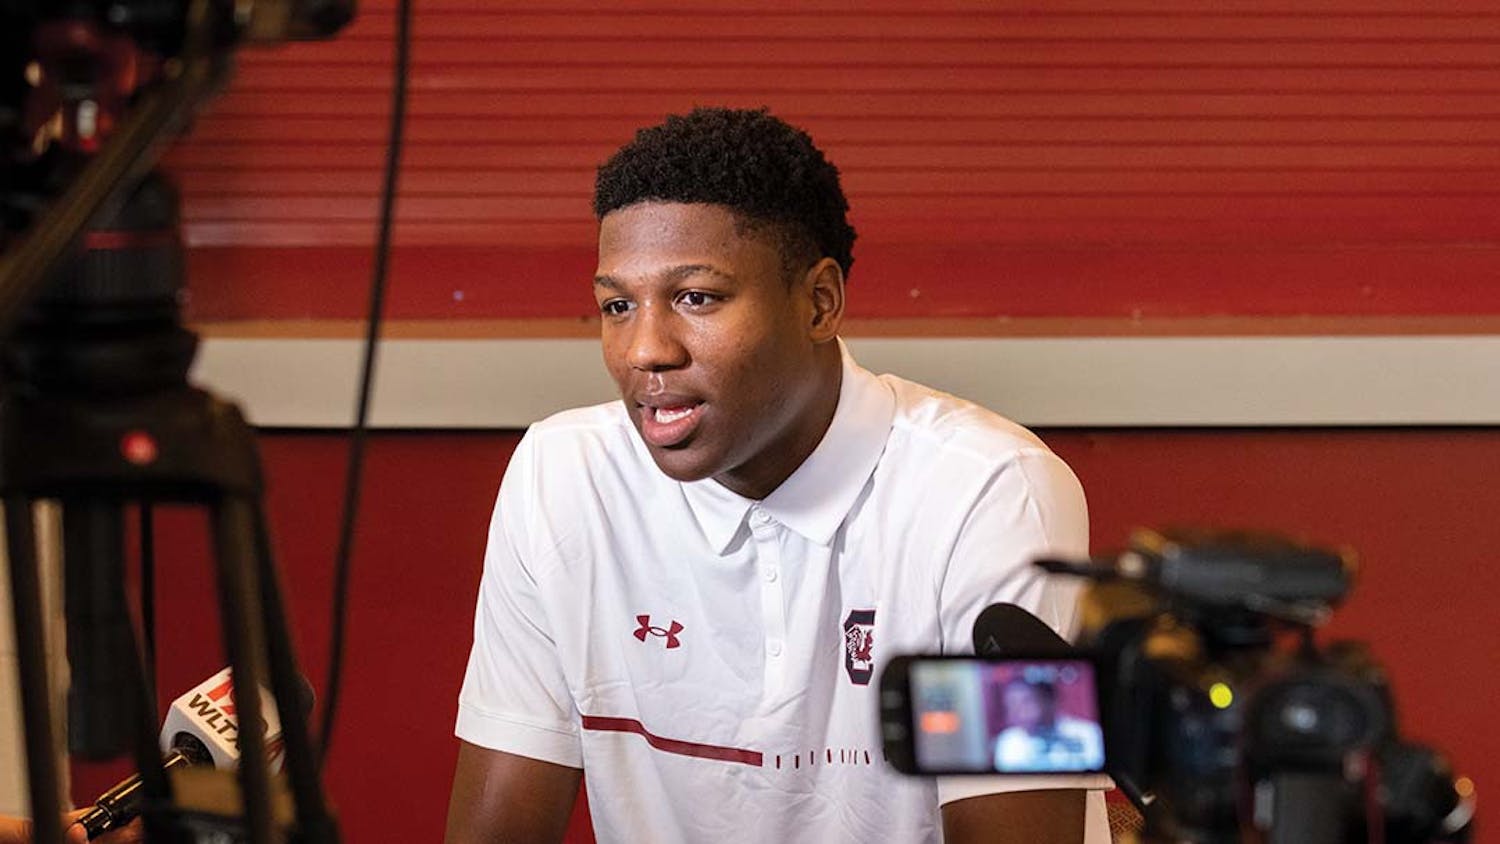 The Gamecocks men’s basketball team hosted a local media day on Oct. 12, 2022. Freshman forward Gregory “GG” Jackson II answers questions from members of the media.&nbsp;